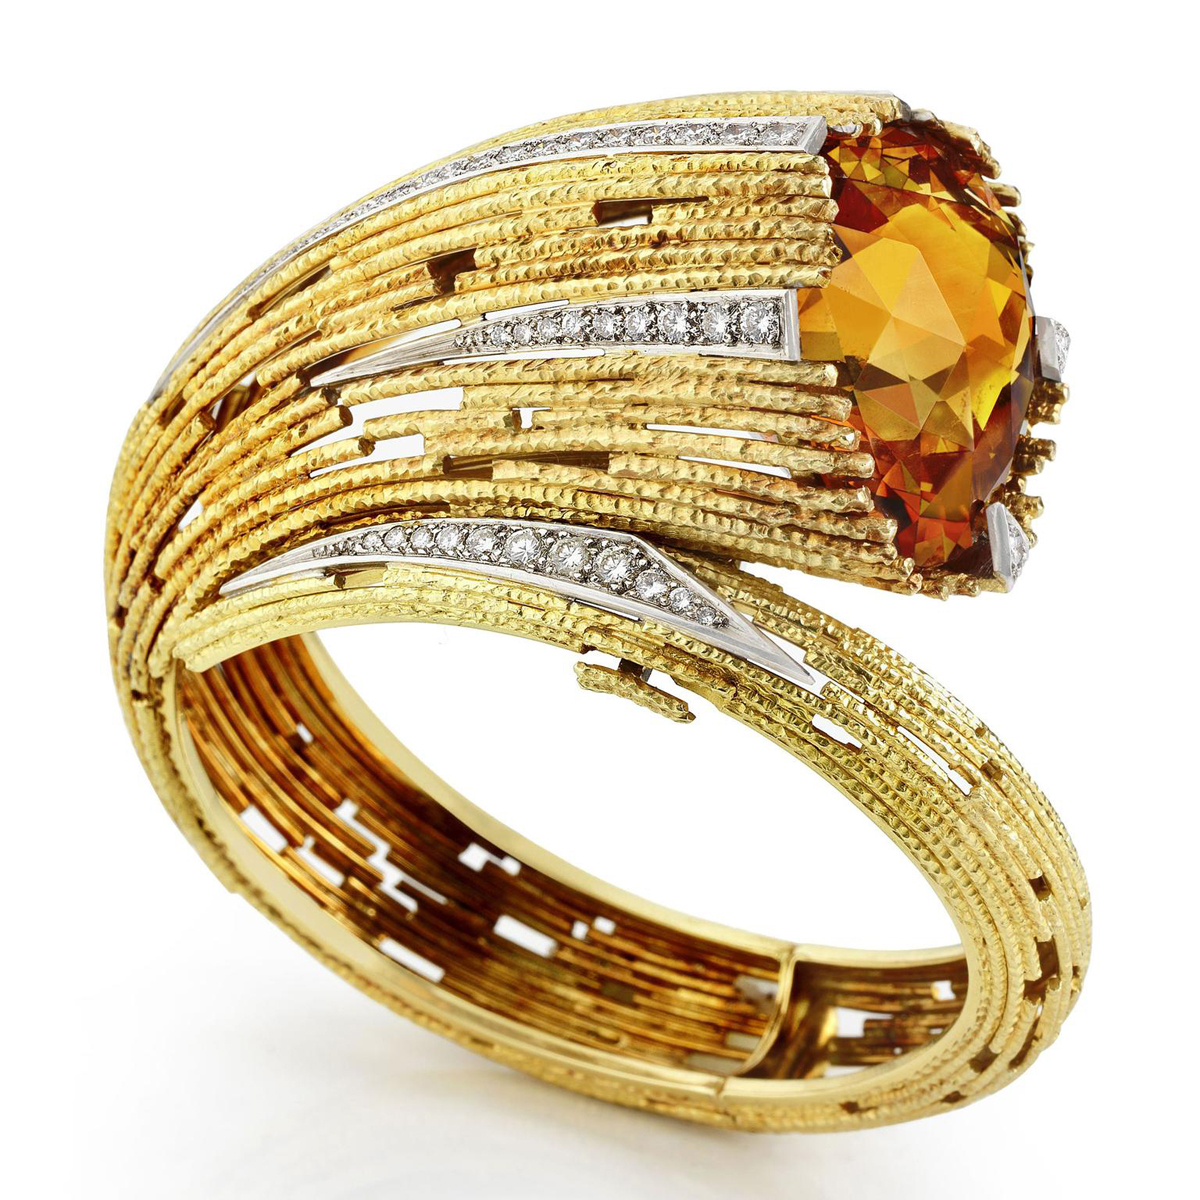 a-citrine-and-diamond-set-bangle-by-andrew-grima.jpg__1536x0_q75_crop-scale_subsampling-2_upscale-false